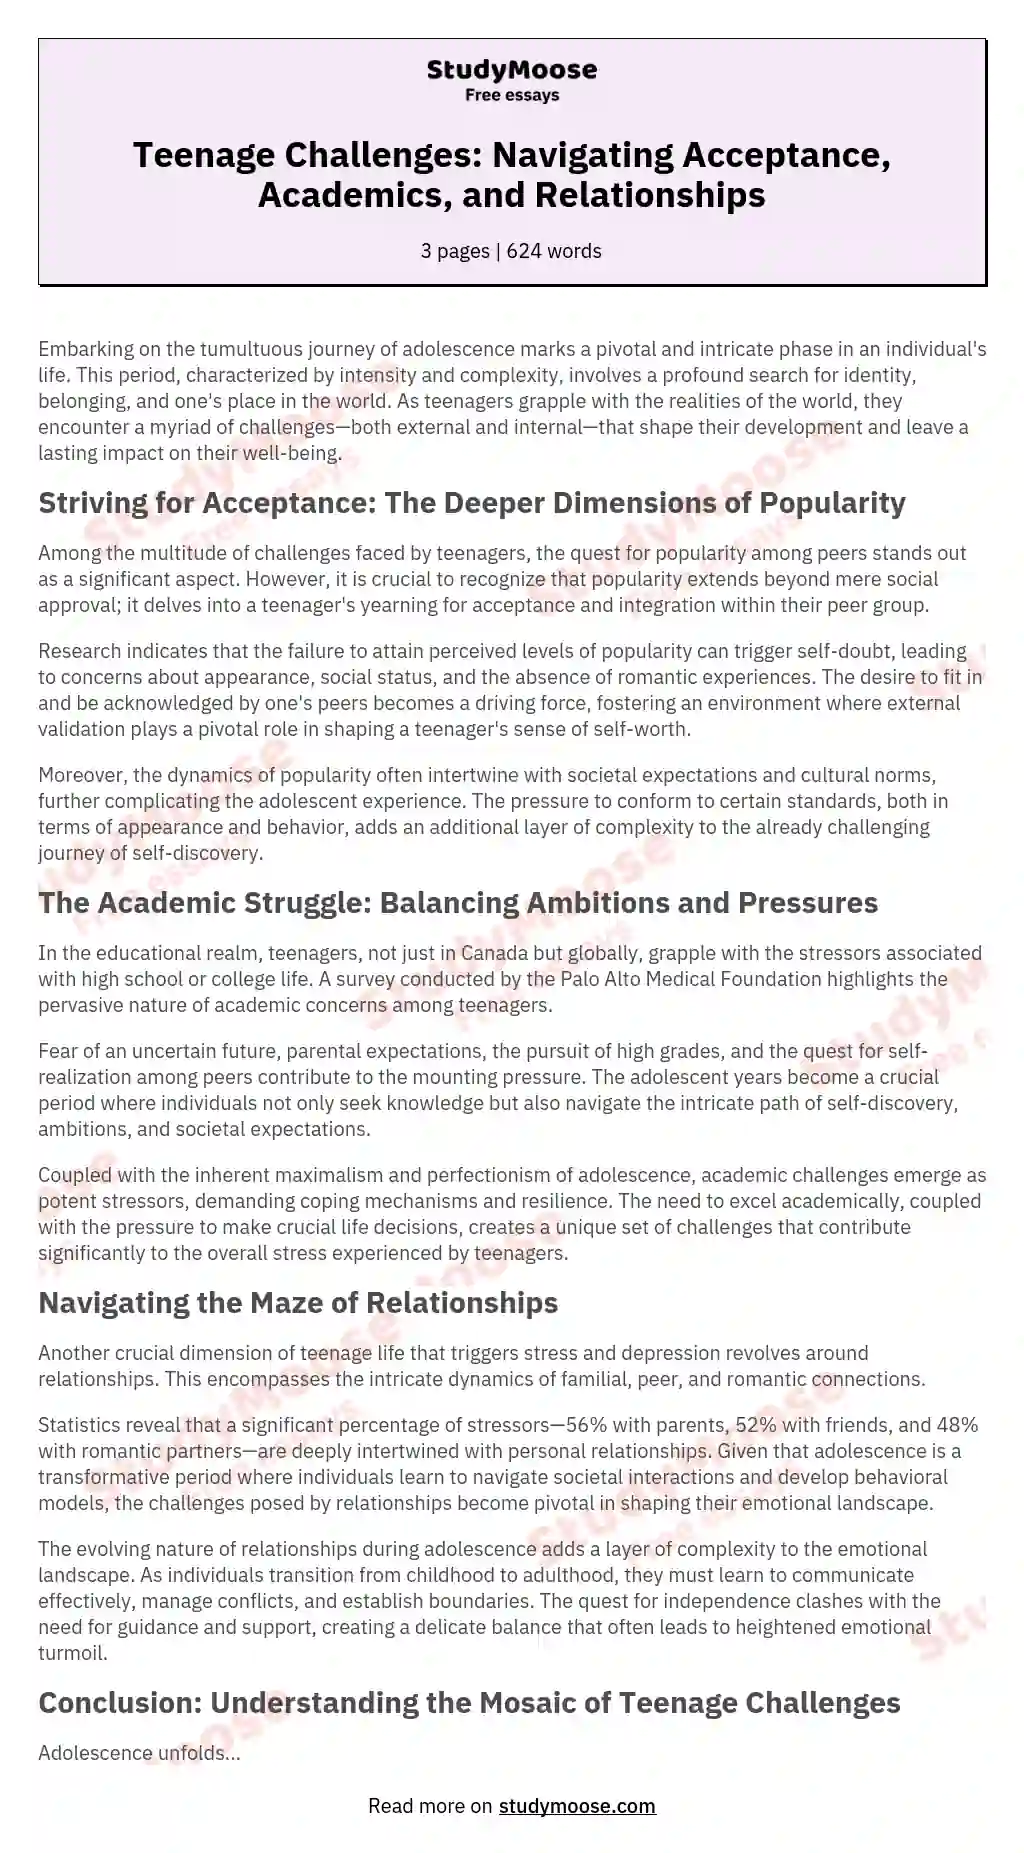 Teenage Challenges: Navigating Acceptance, Academics, and Relationships essay